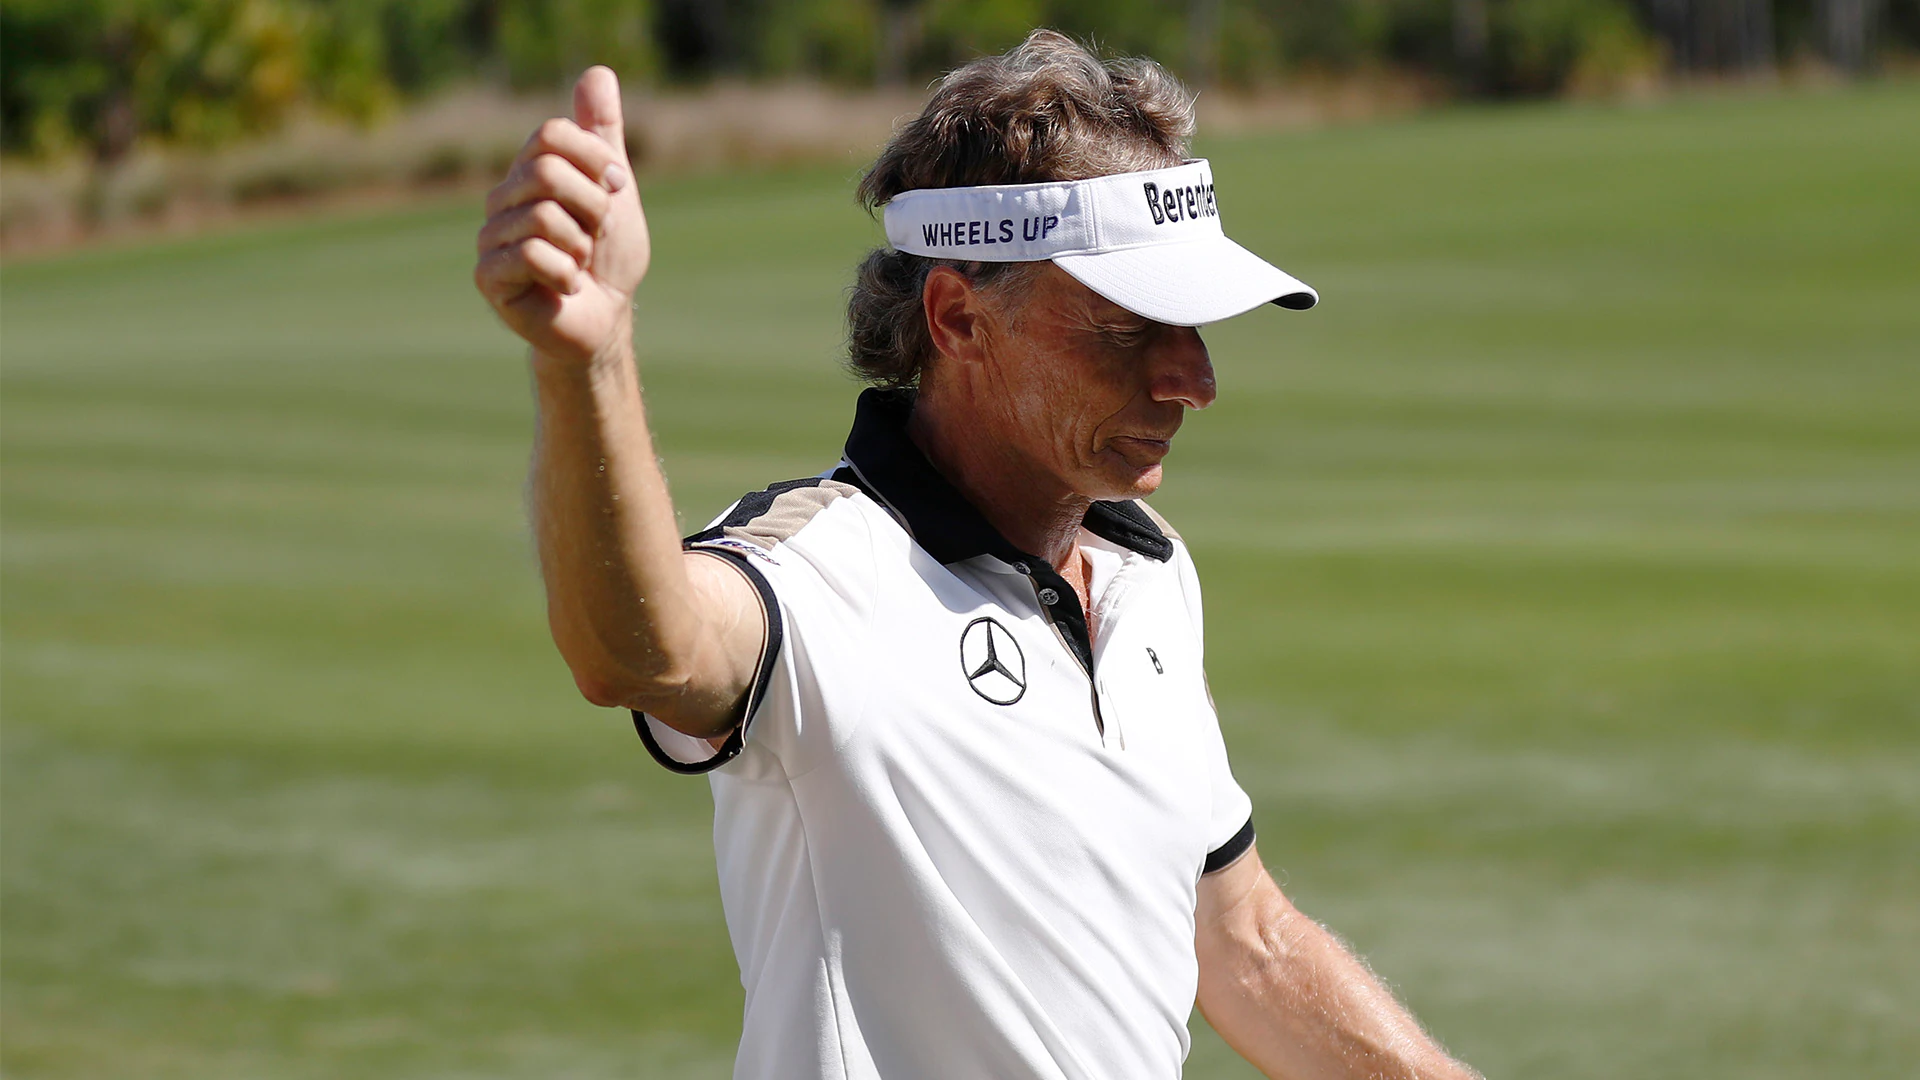 Bernhard Langer, 64, takes Rd. 1 Chubb Classic lead by shooting age